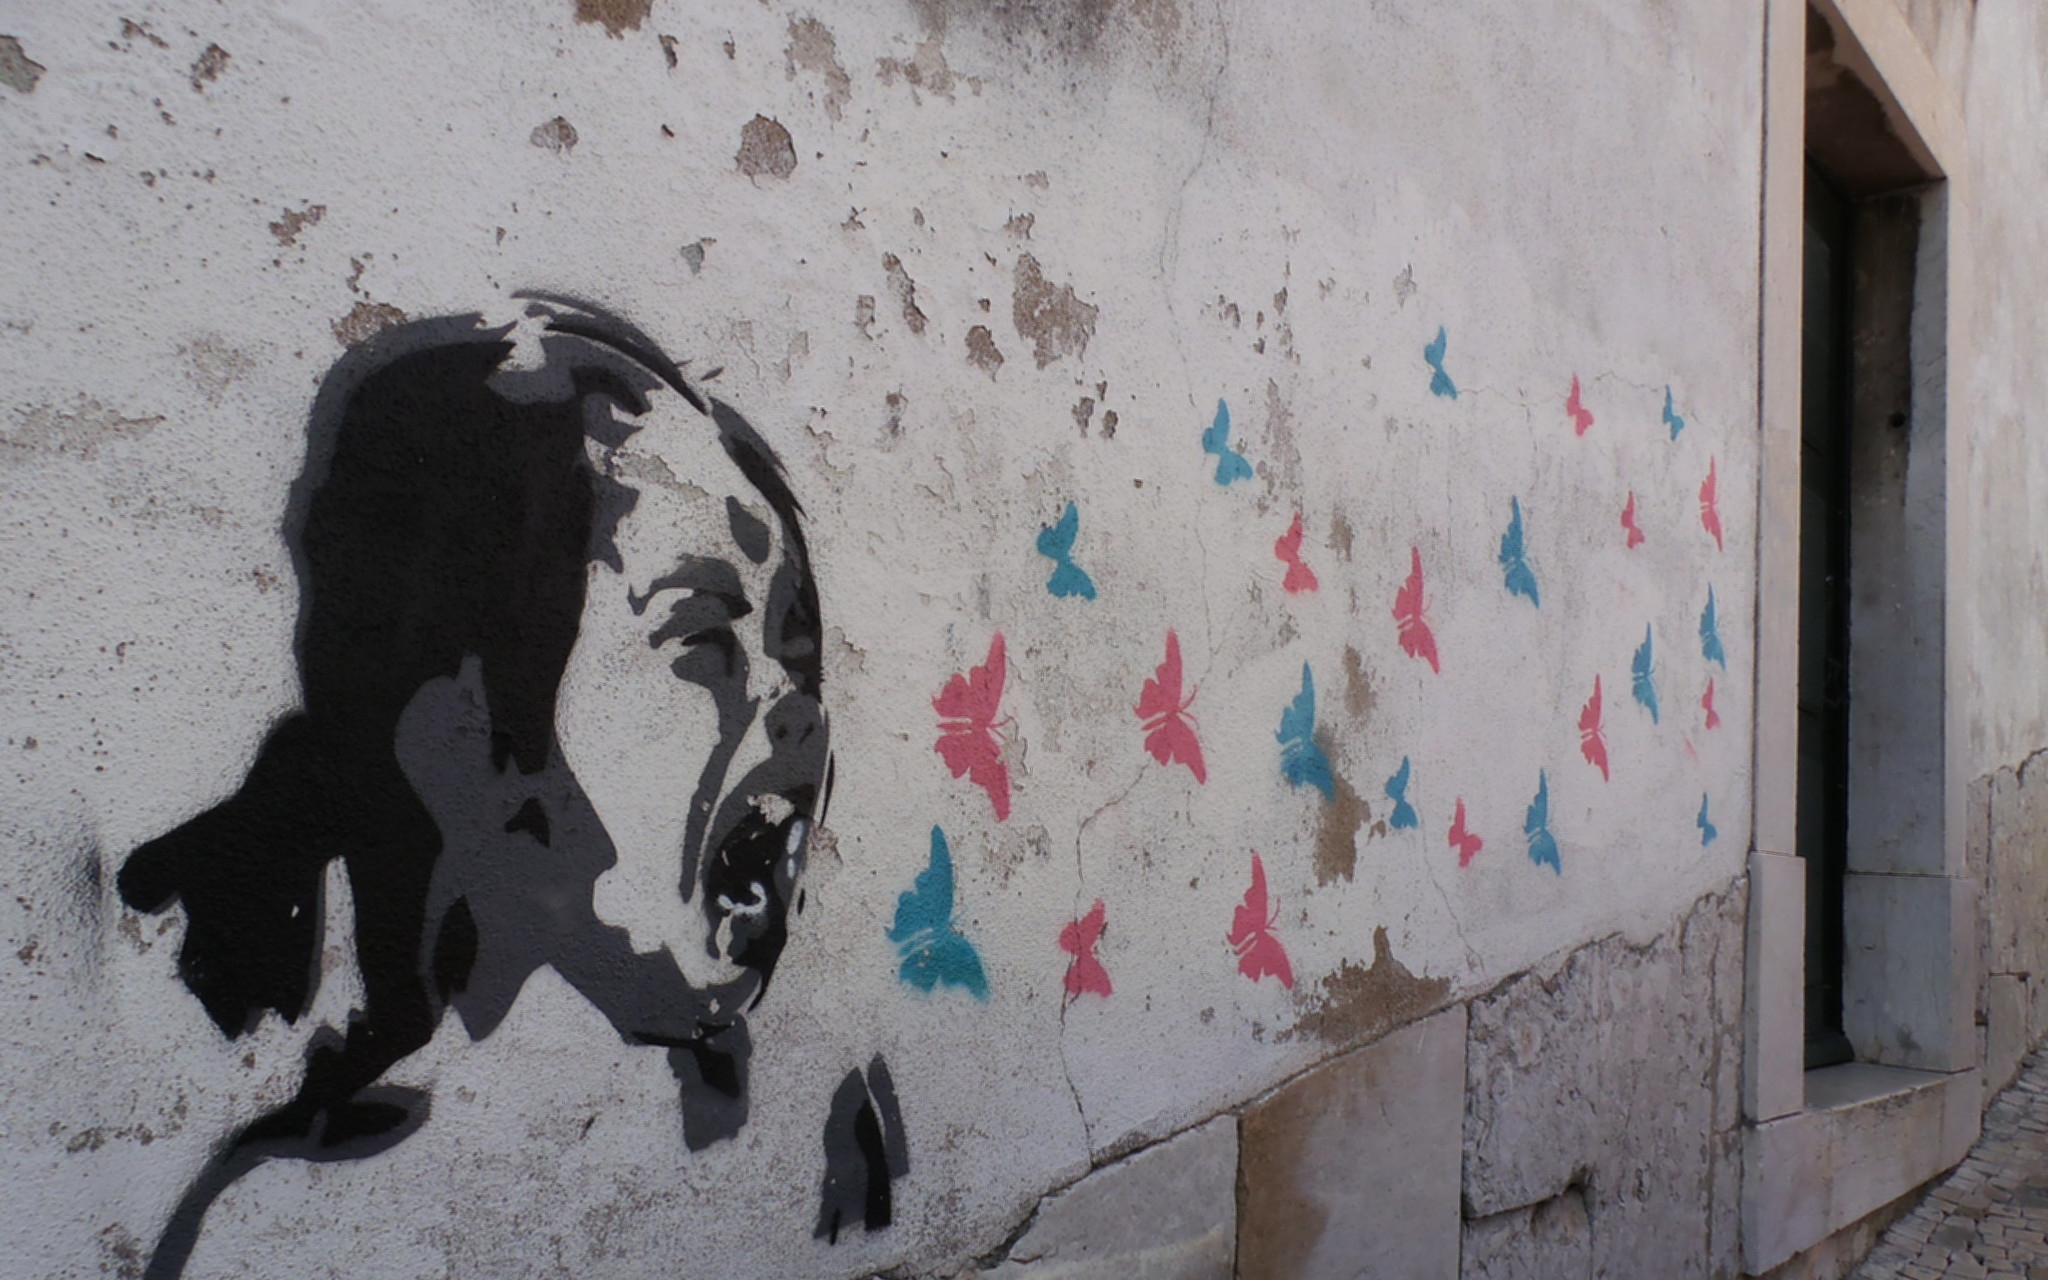 Image: A photo of street art where a young girl screams and blue and pink butterflies flutter out of her mouth